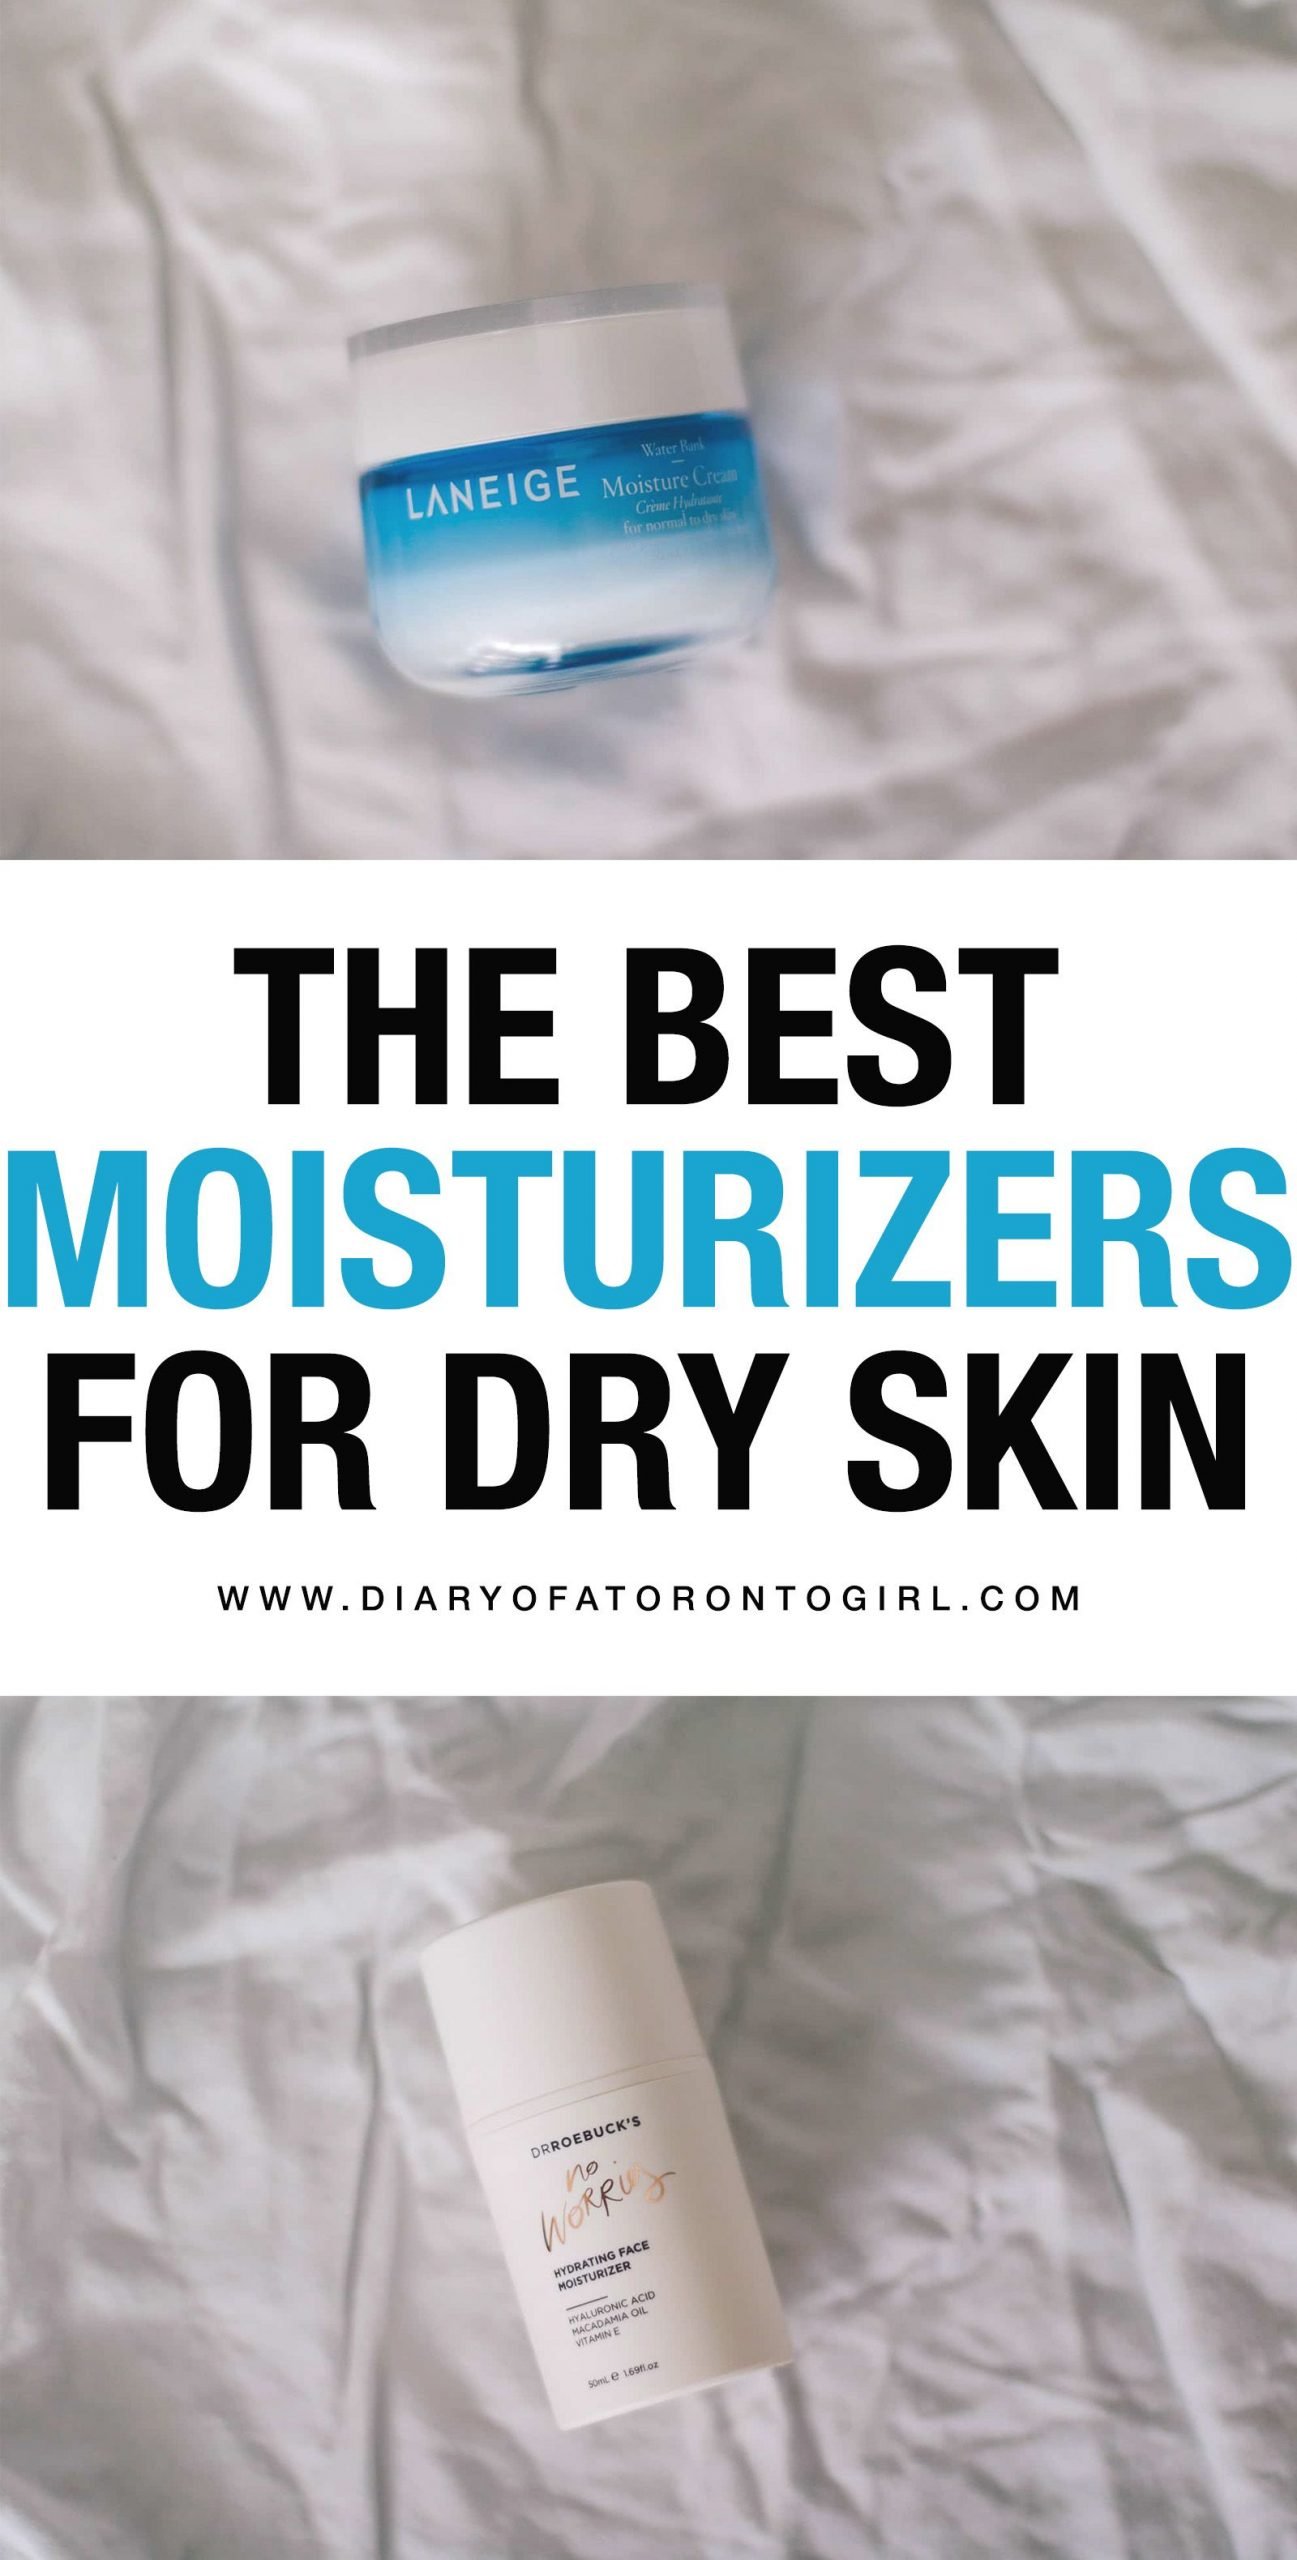 5 Best Face Moisturizers for Dry Skin in 2020 ...